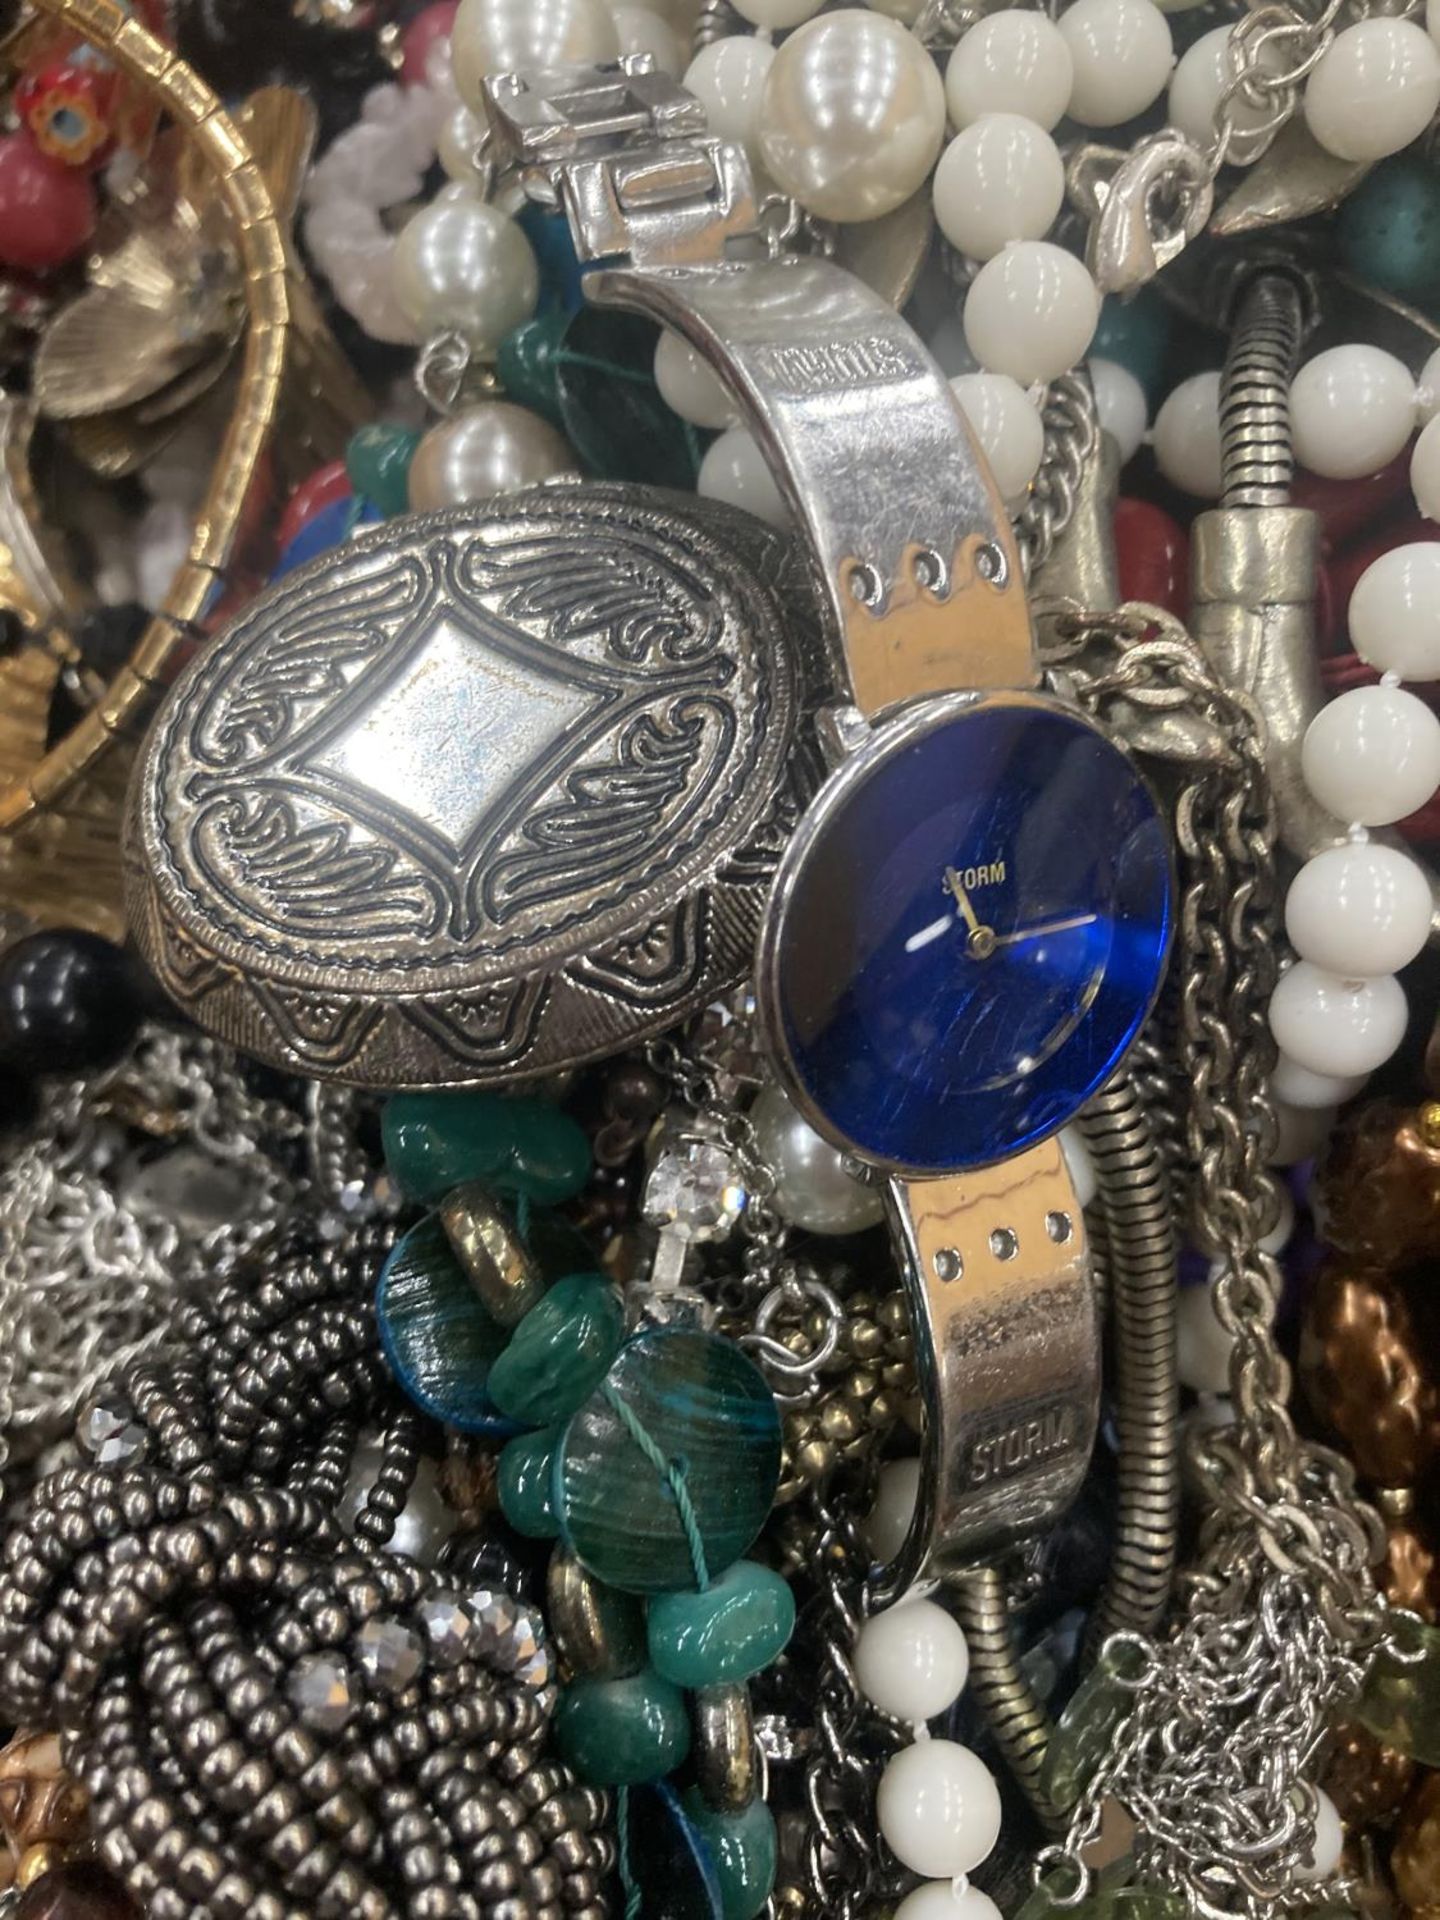 A LARGE QUANTITY OF COSTUME JEWELLERY TO INCLUDE WATCHES, BANGLES, BEADS, NECKLACES, BRACELETS, ETC - Image 2 of 3